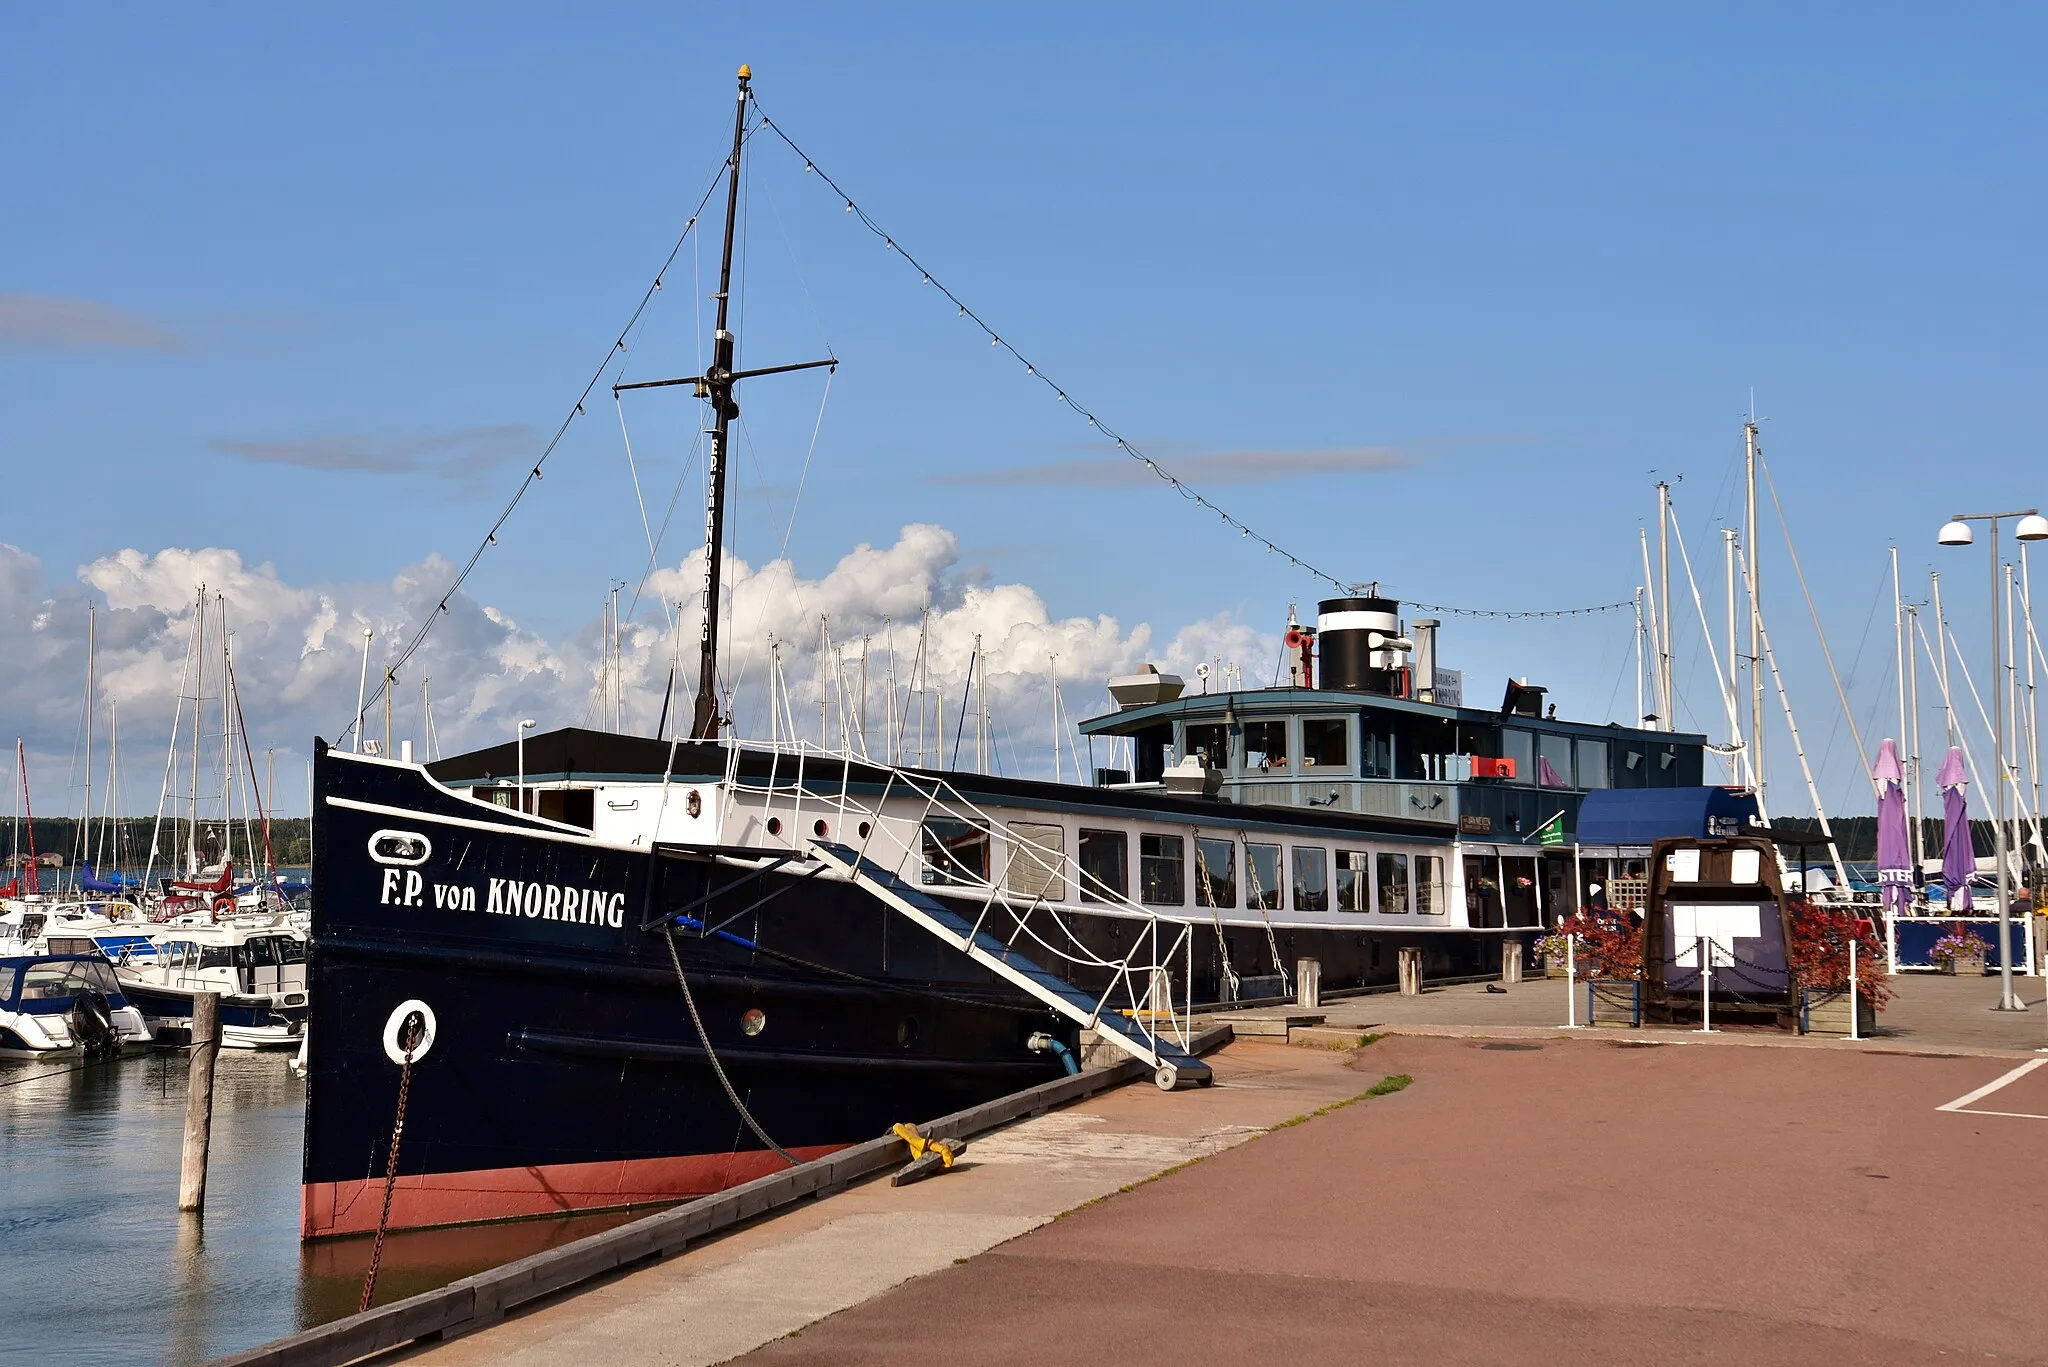 Photo showing: View of the F.P. von Knorring (originally Jan Nieveen), a passenger ship now used as a floating restaurant in Österhamn, Mariehamn, Åland Islands, Finland